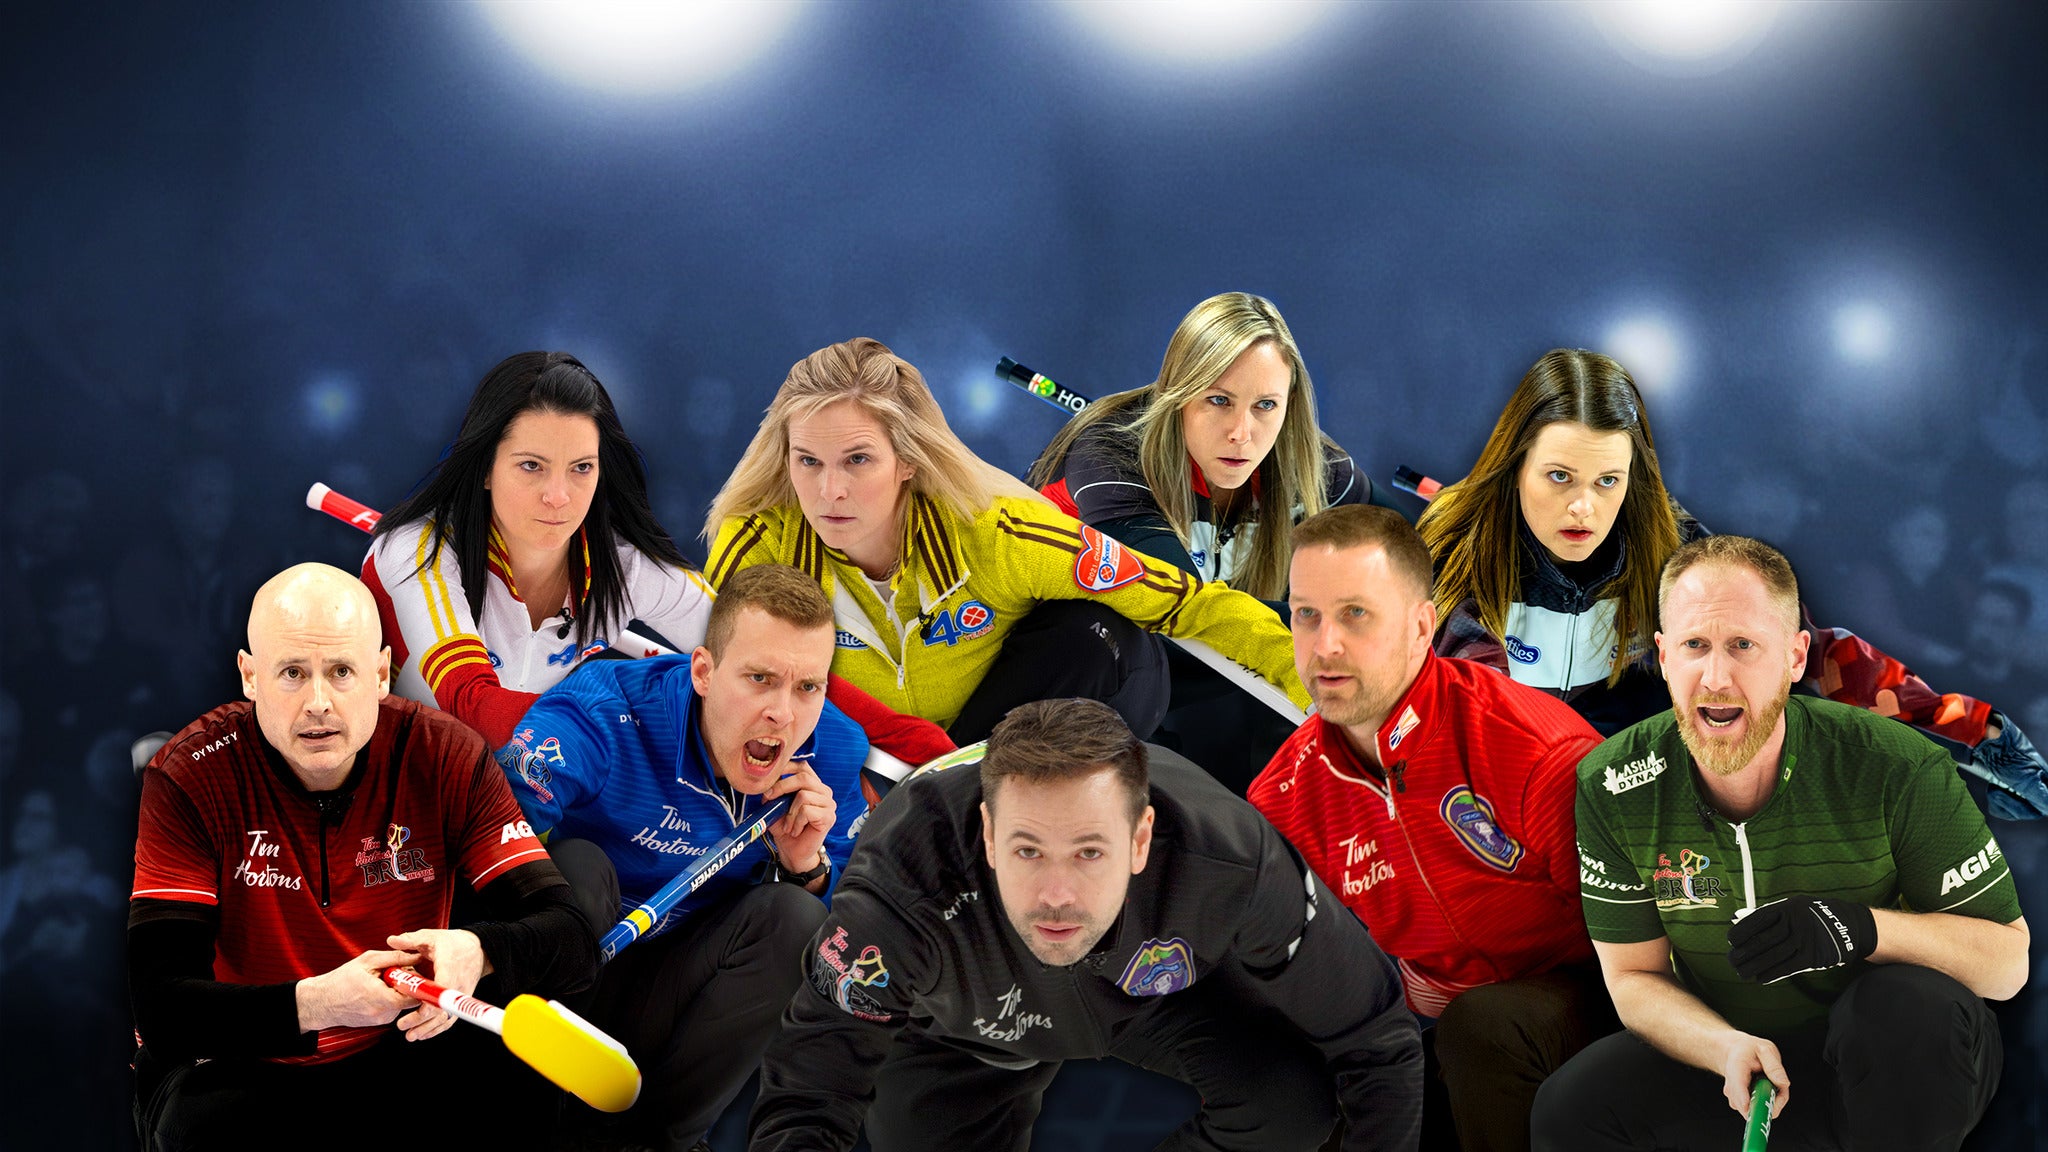 2021 Tim Hortons Curling Trials - Wednesday Package in Saskatoon promo photo for Curling Canada presale offer code